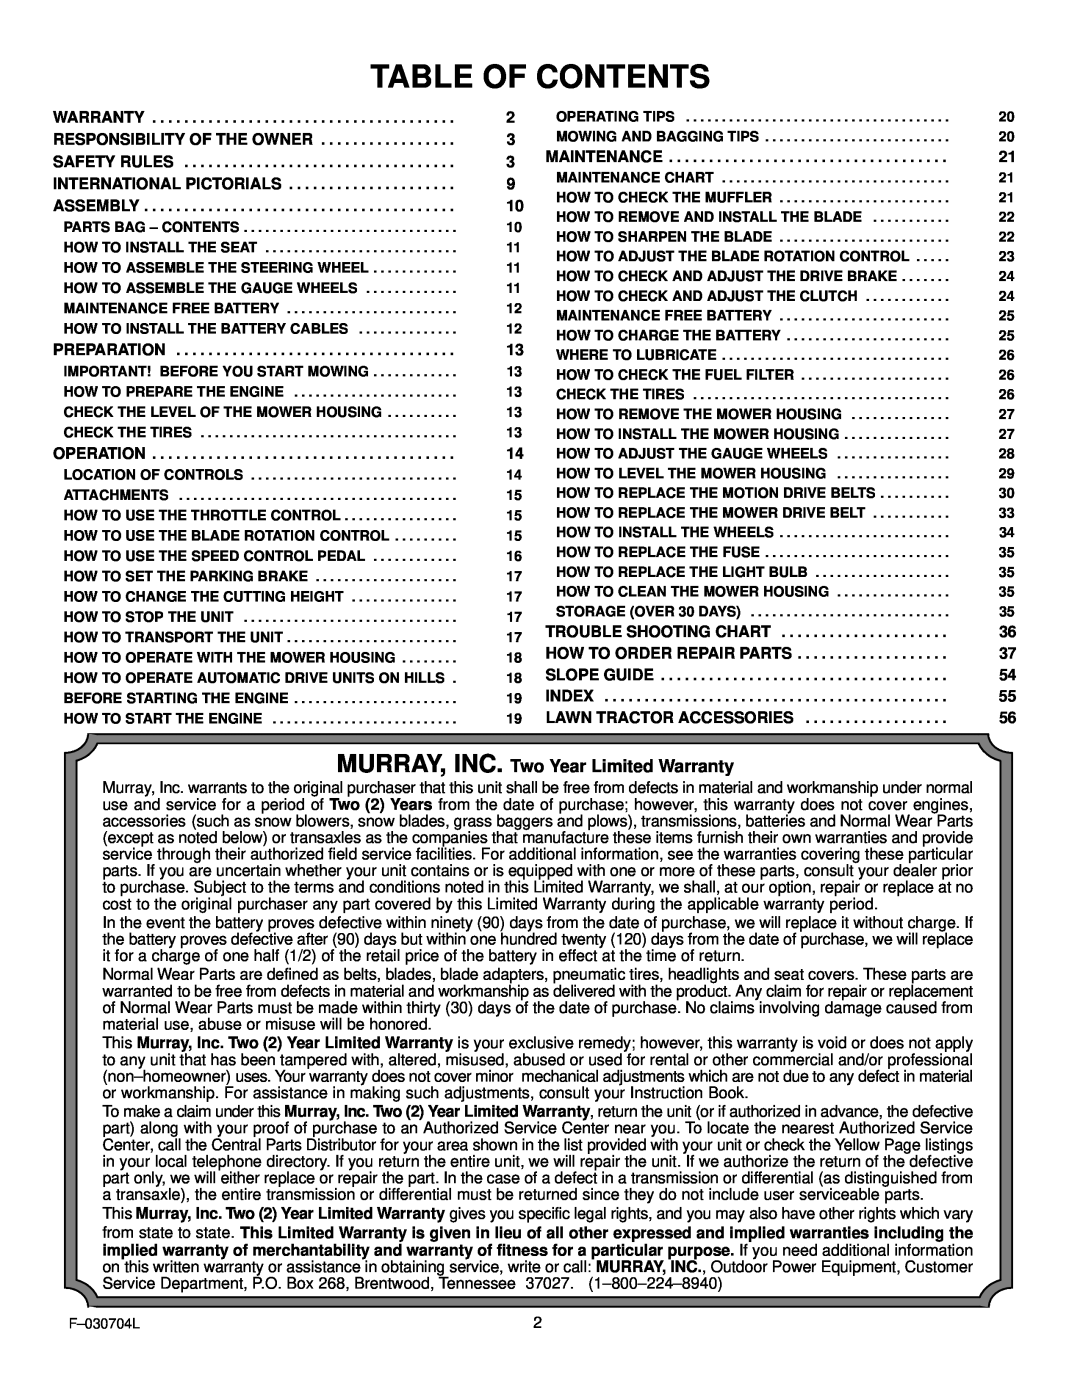 Murray 425303x92B manual Table Of Contents, MURRAY, INC. Two Year Limited Warranty 